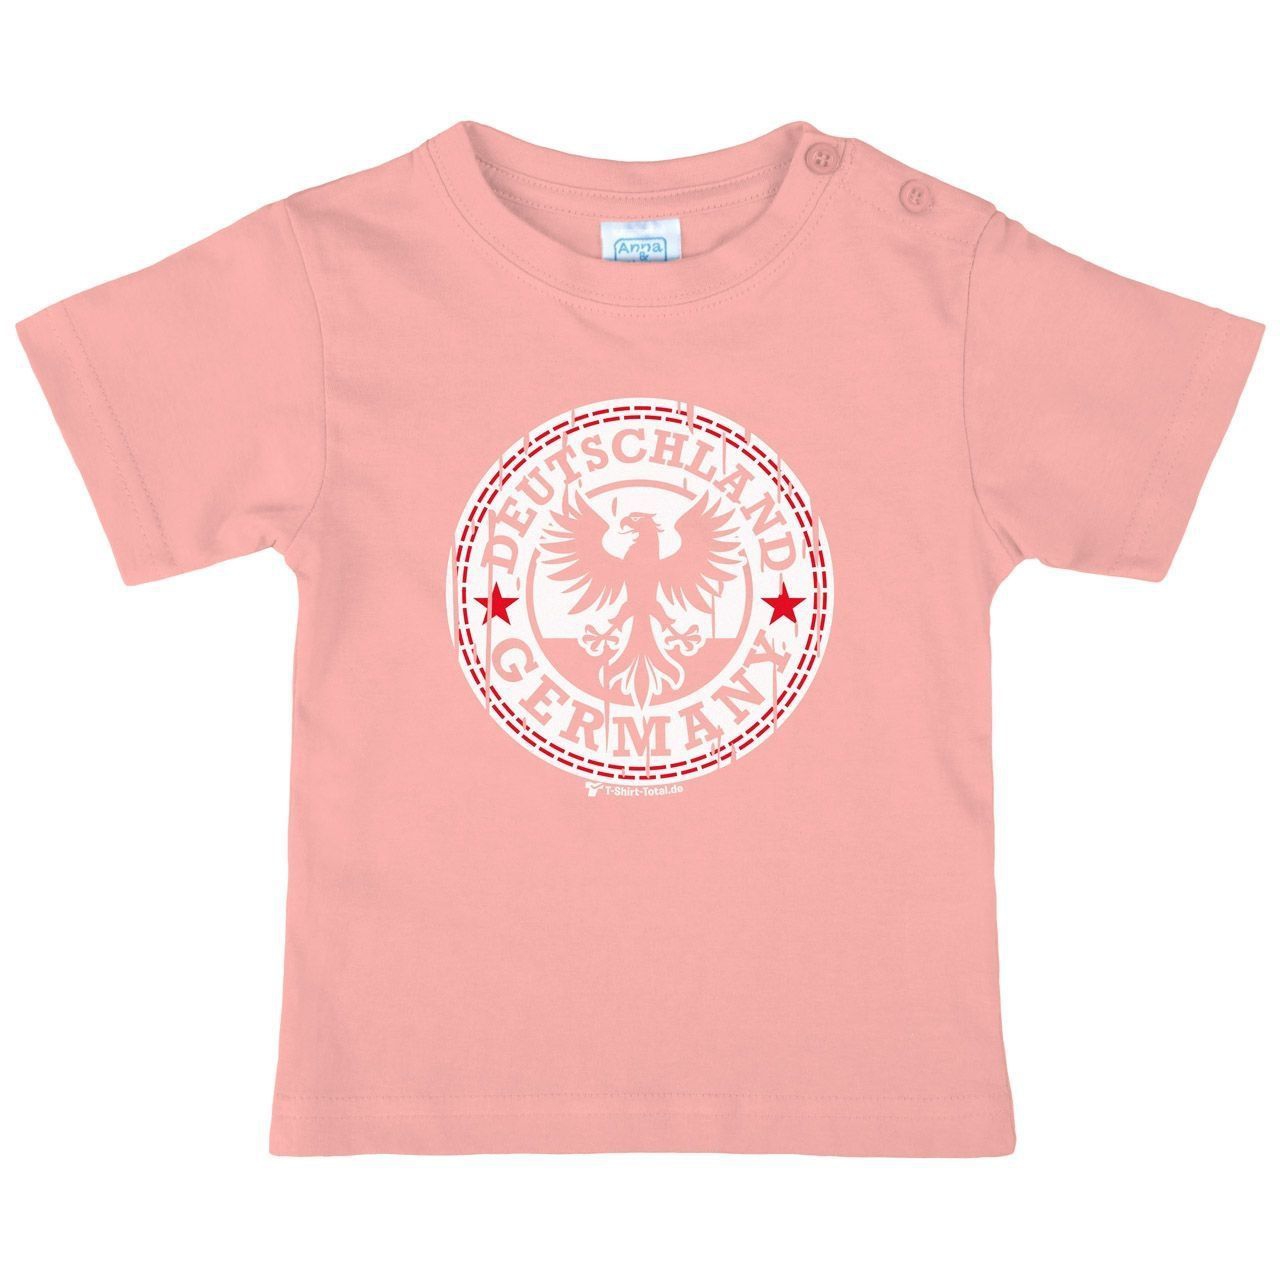 Germany Button Kinder T-Shirt rosa 122 / 128